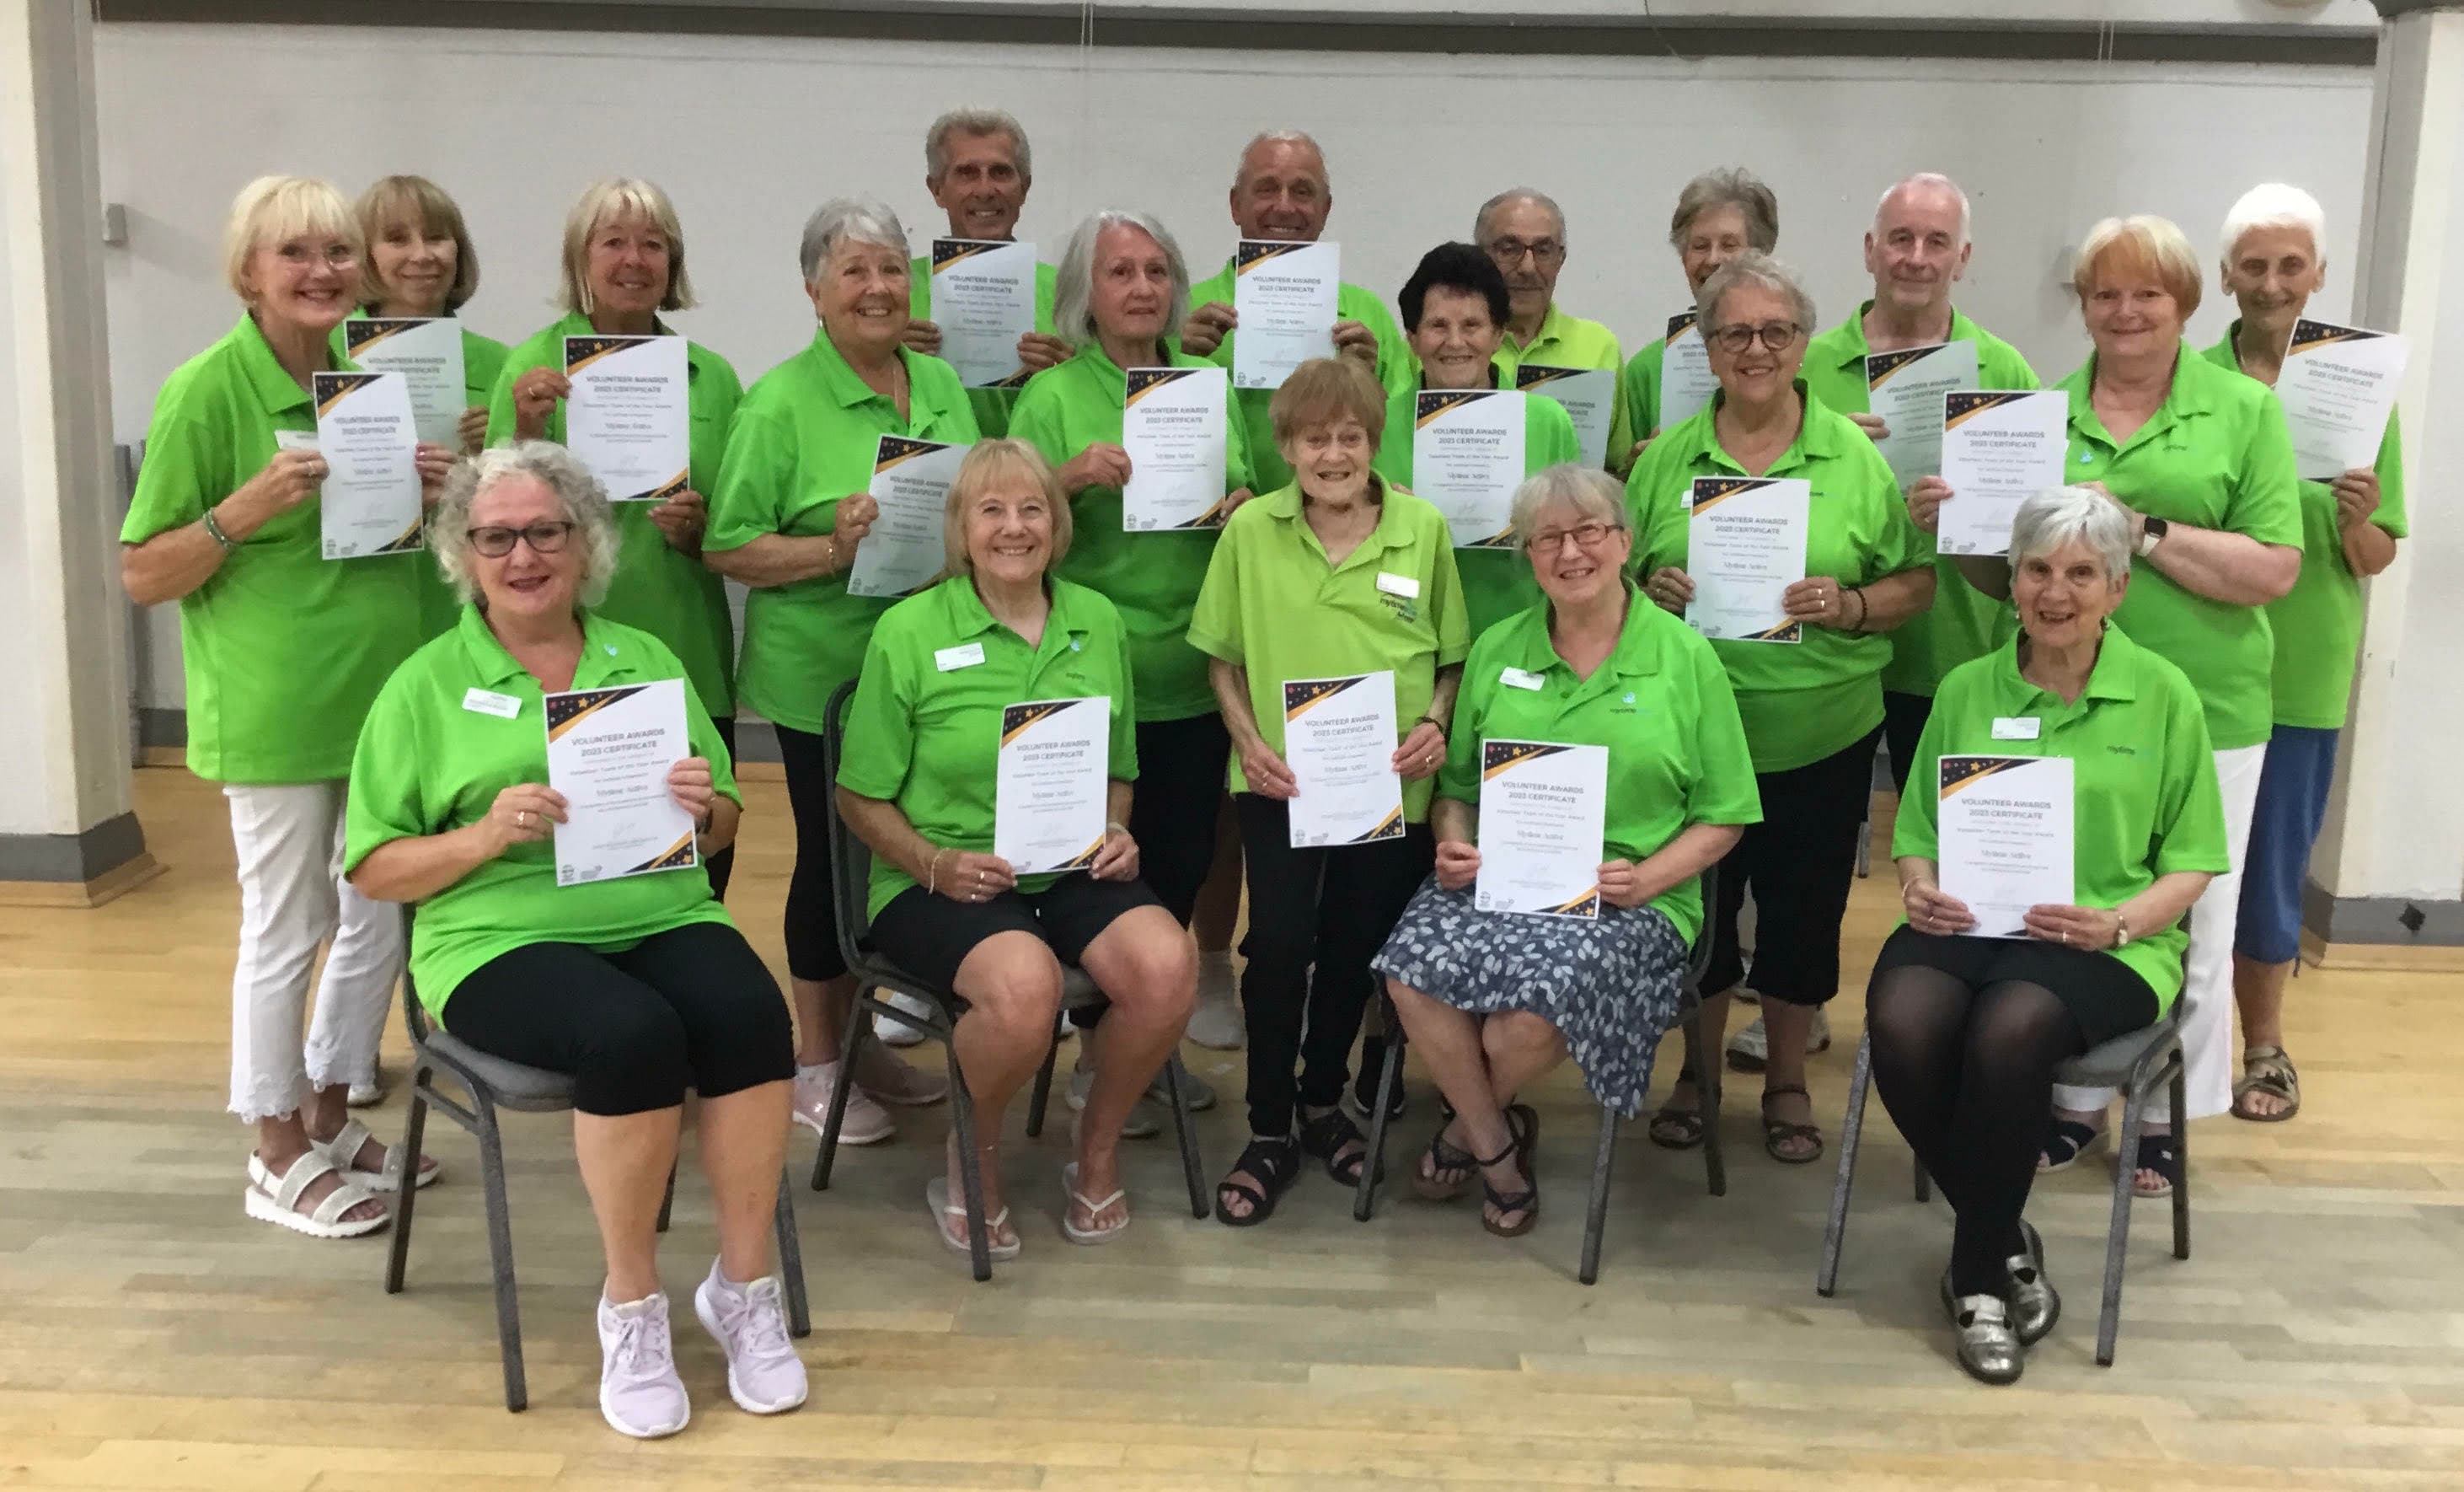 Mytime volunteers recognised at Community Awards